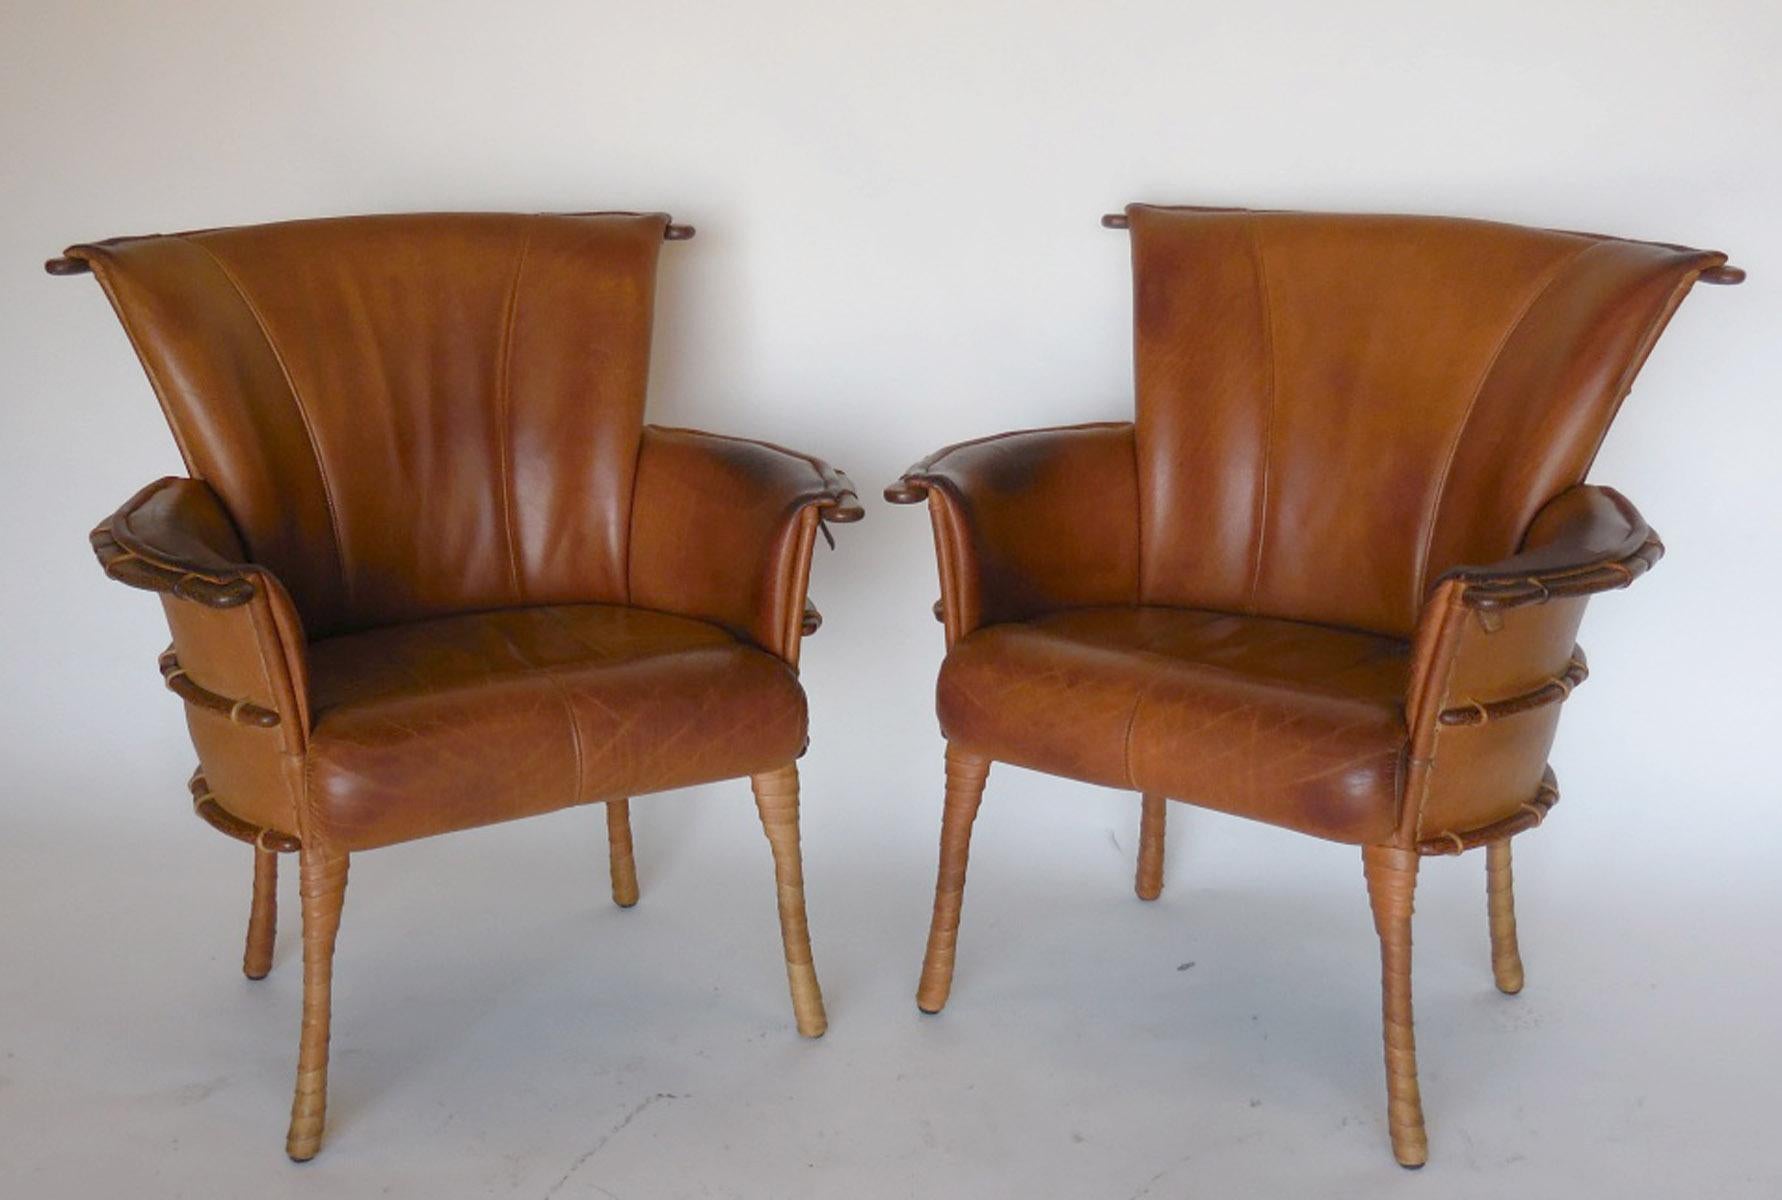 This pair of club chairs were made in Australia, in the 1990s. Constructed of palm wood and leather. Unusual tapered leather wrapped legs. The back of the chair is decoratively supported by ribs of sustainable palm wood. The front and back of each